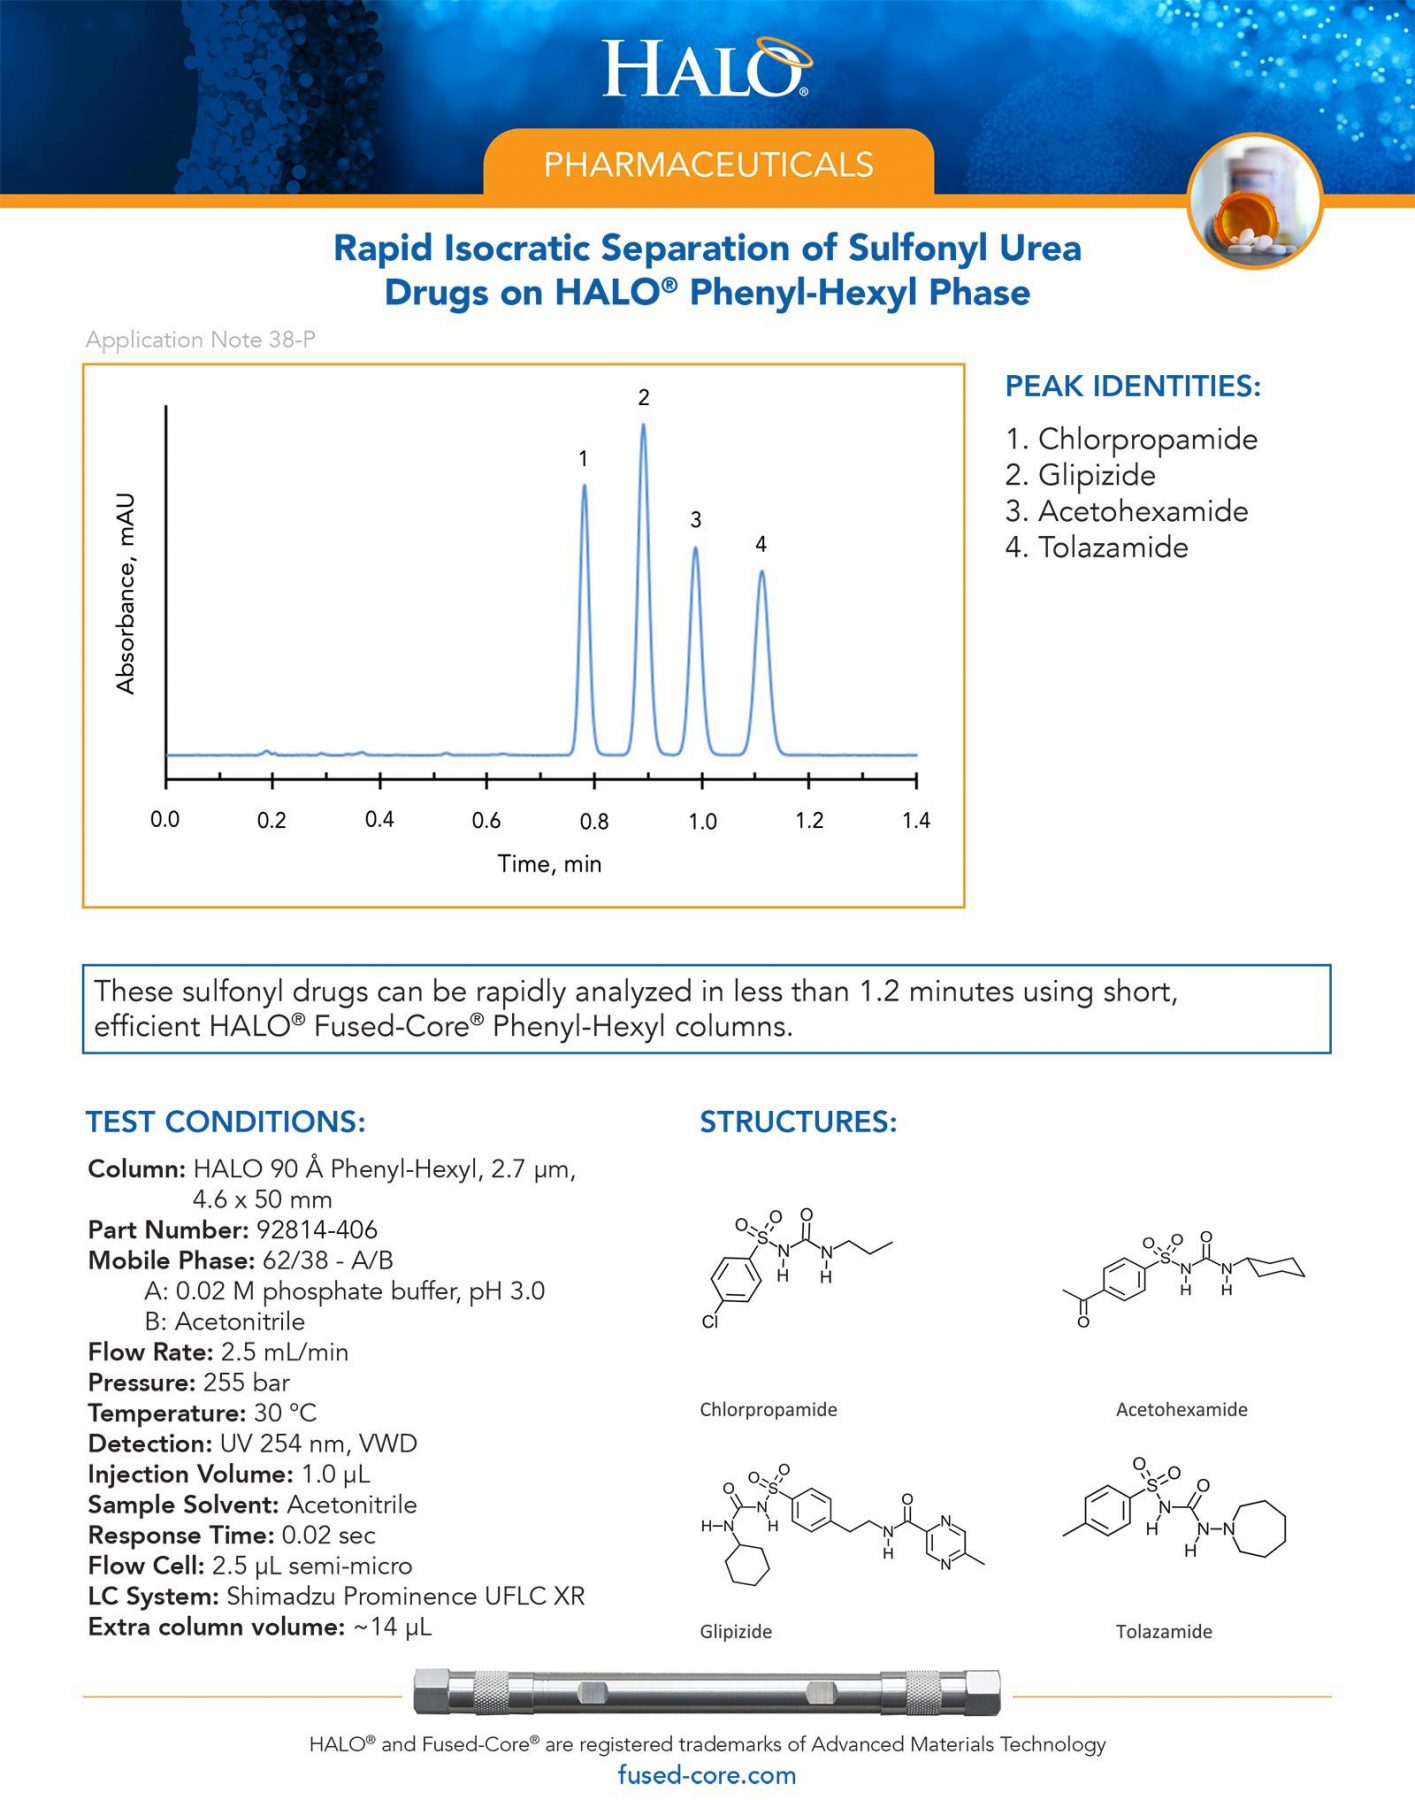 hplc for pharmaceutical scientists - rapid isocratic separation of sulfonyl urea drugs on phenyl-hexyl phase column